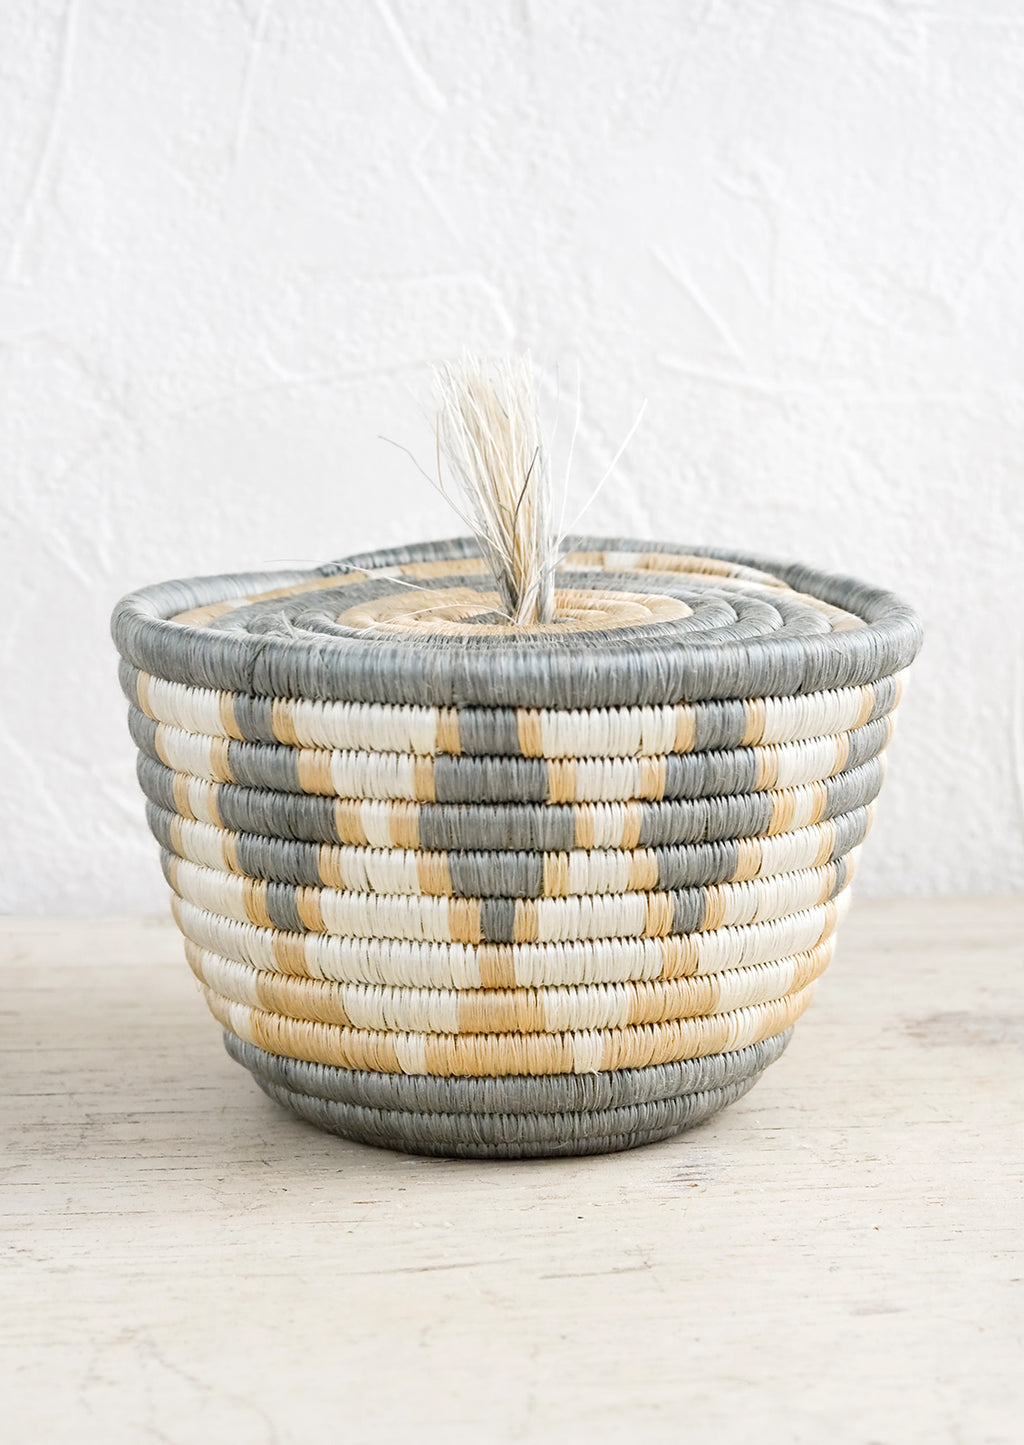 1: A small sweetgrass basket with flat lid and tassel detail.